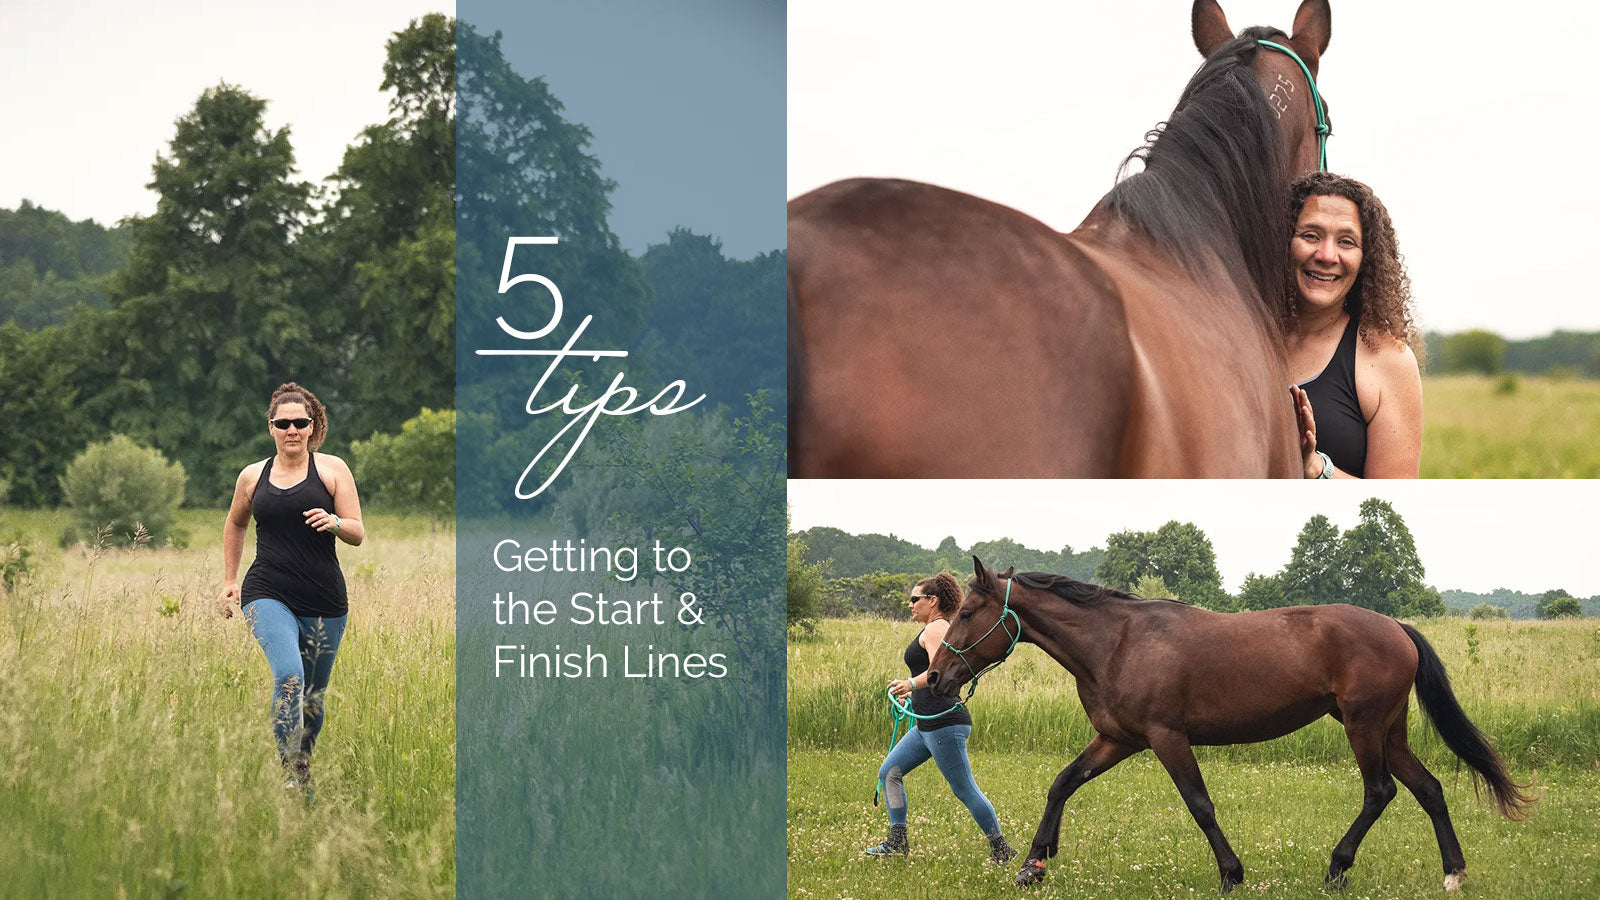 5 Tips on Getting to the Start & Finish Lines